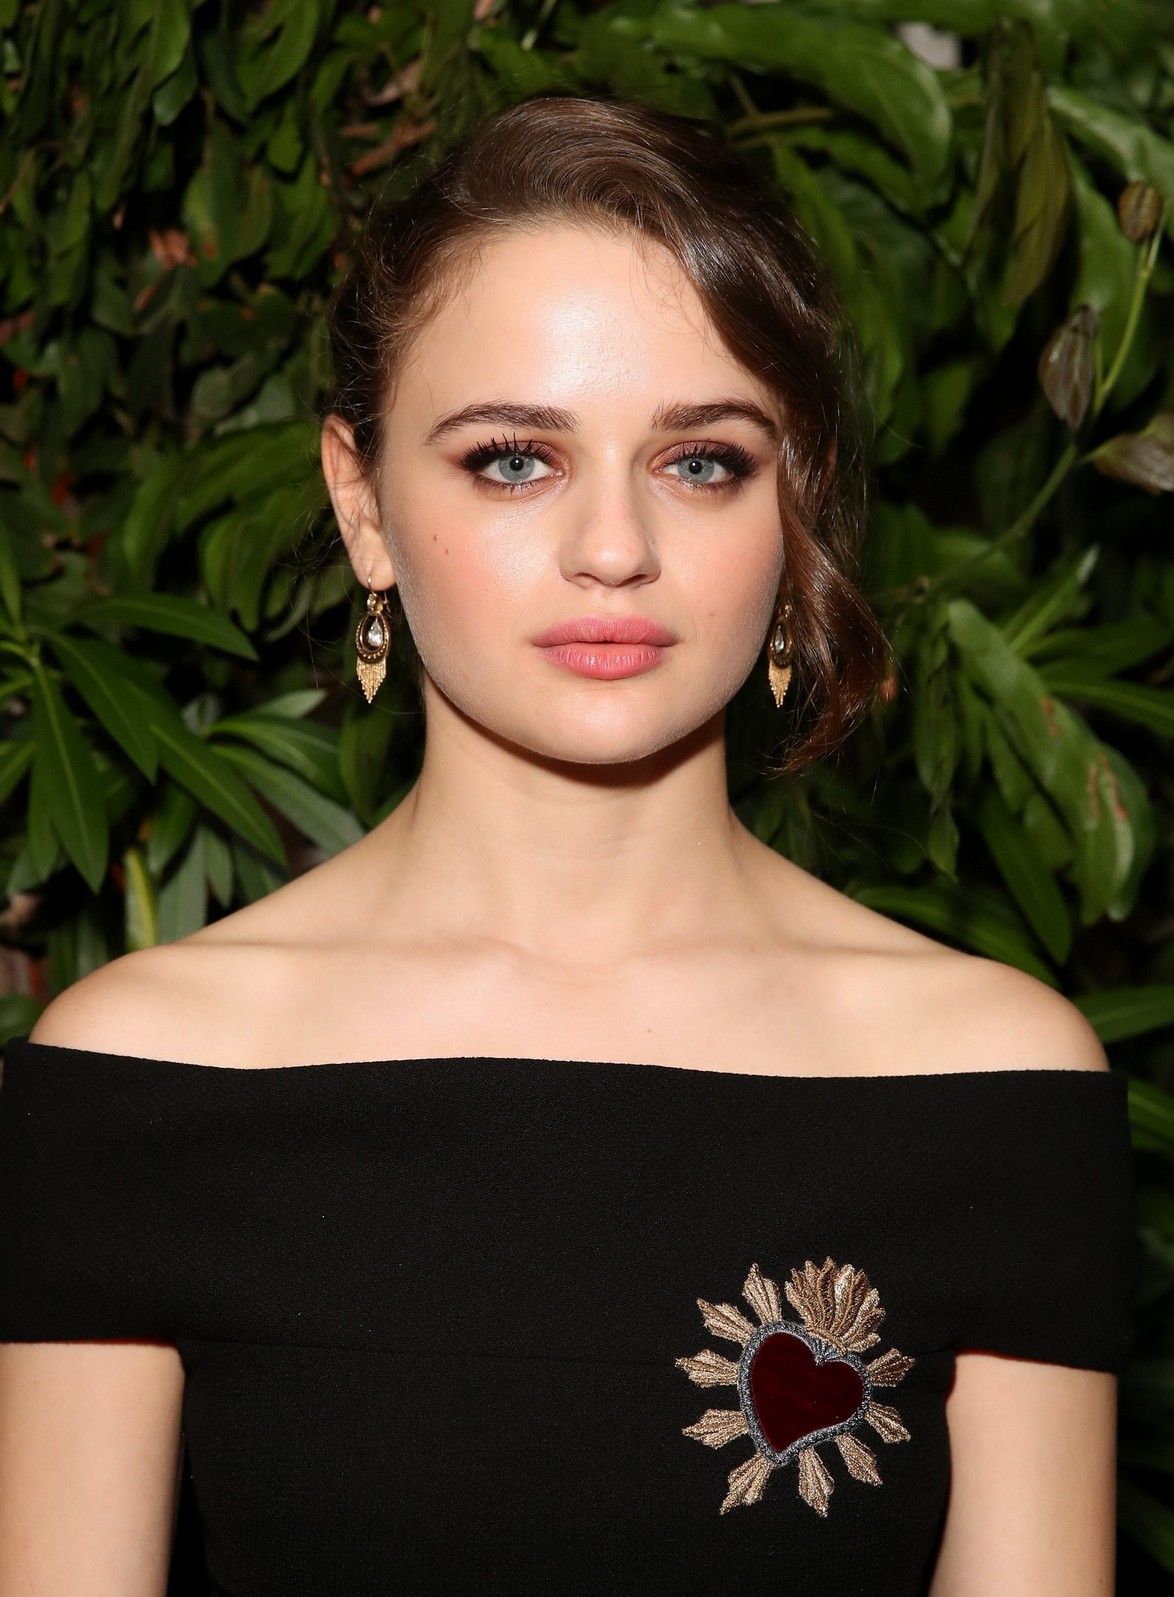 70+ Hot And Sexy Pictures Of Joey King Exposes Her Curvy Body 308